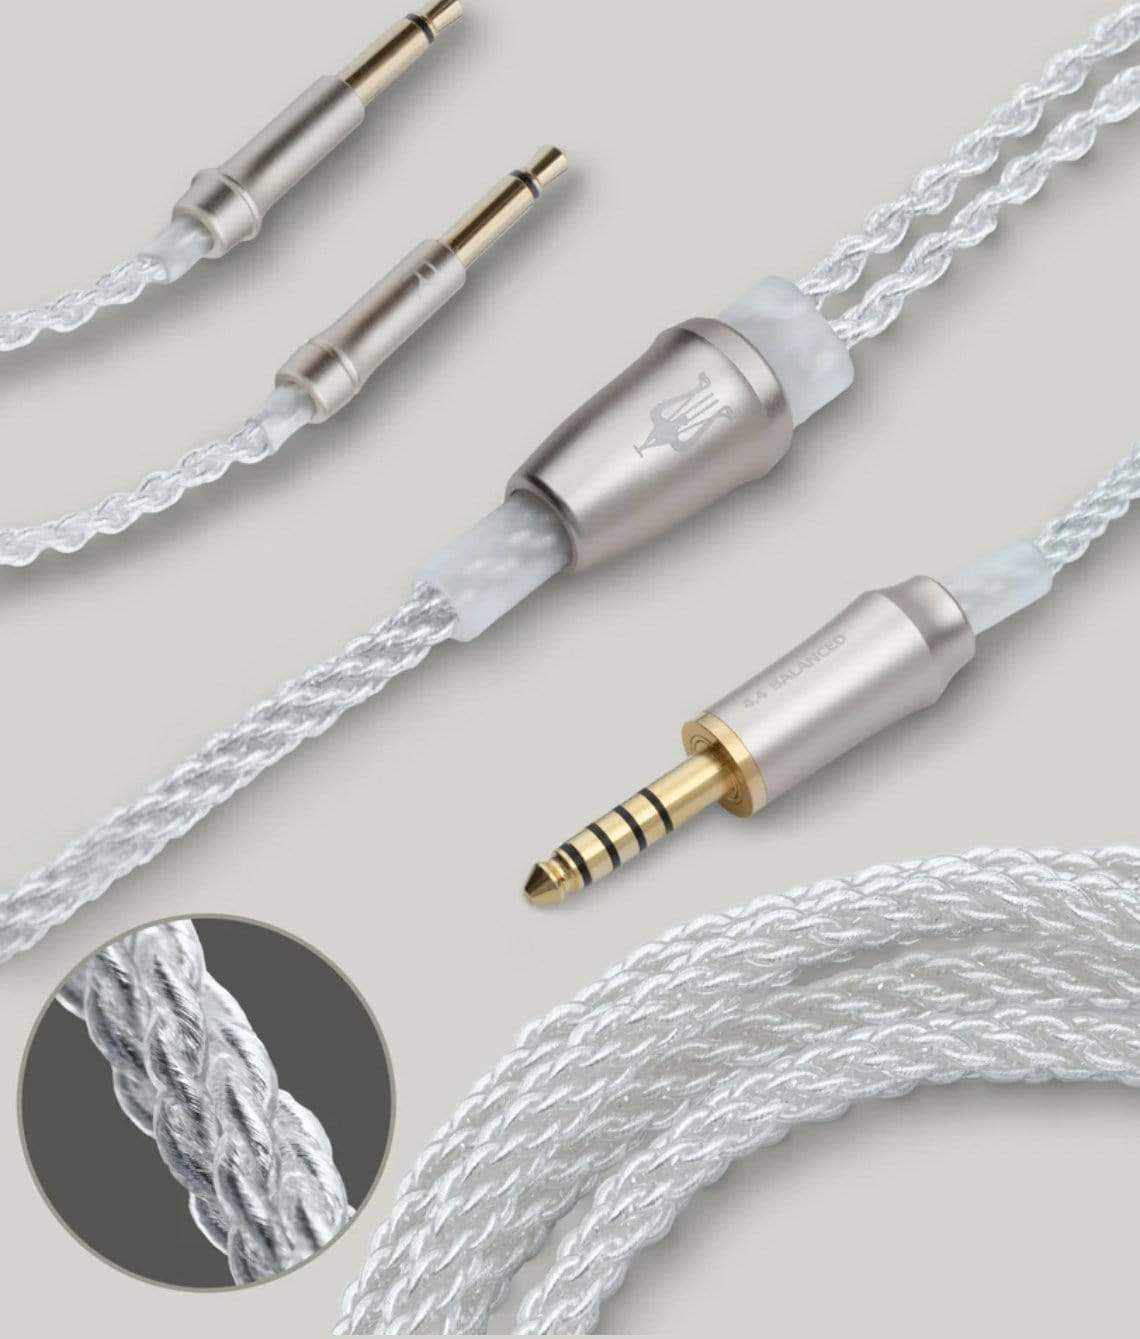 Meze 99 Series Silver Plated Upgrade Cables